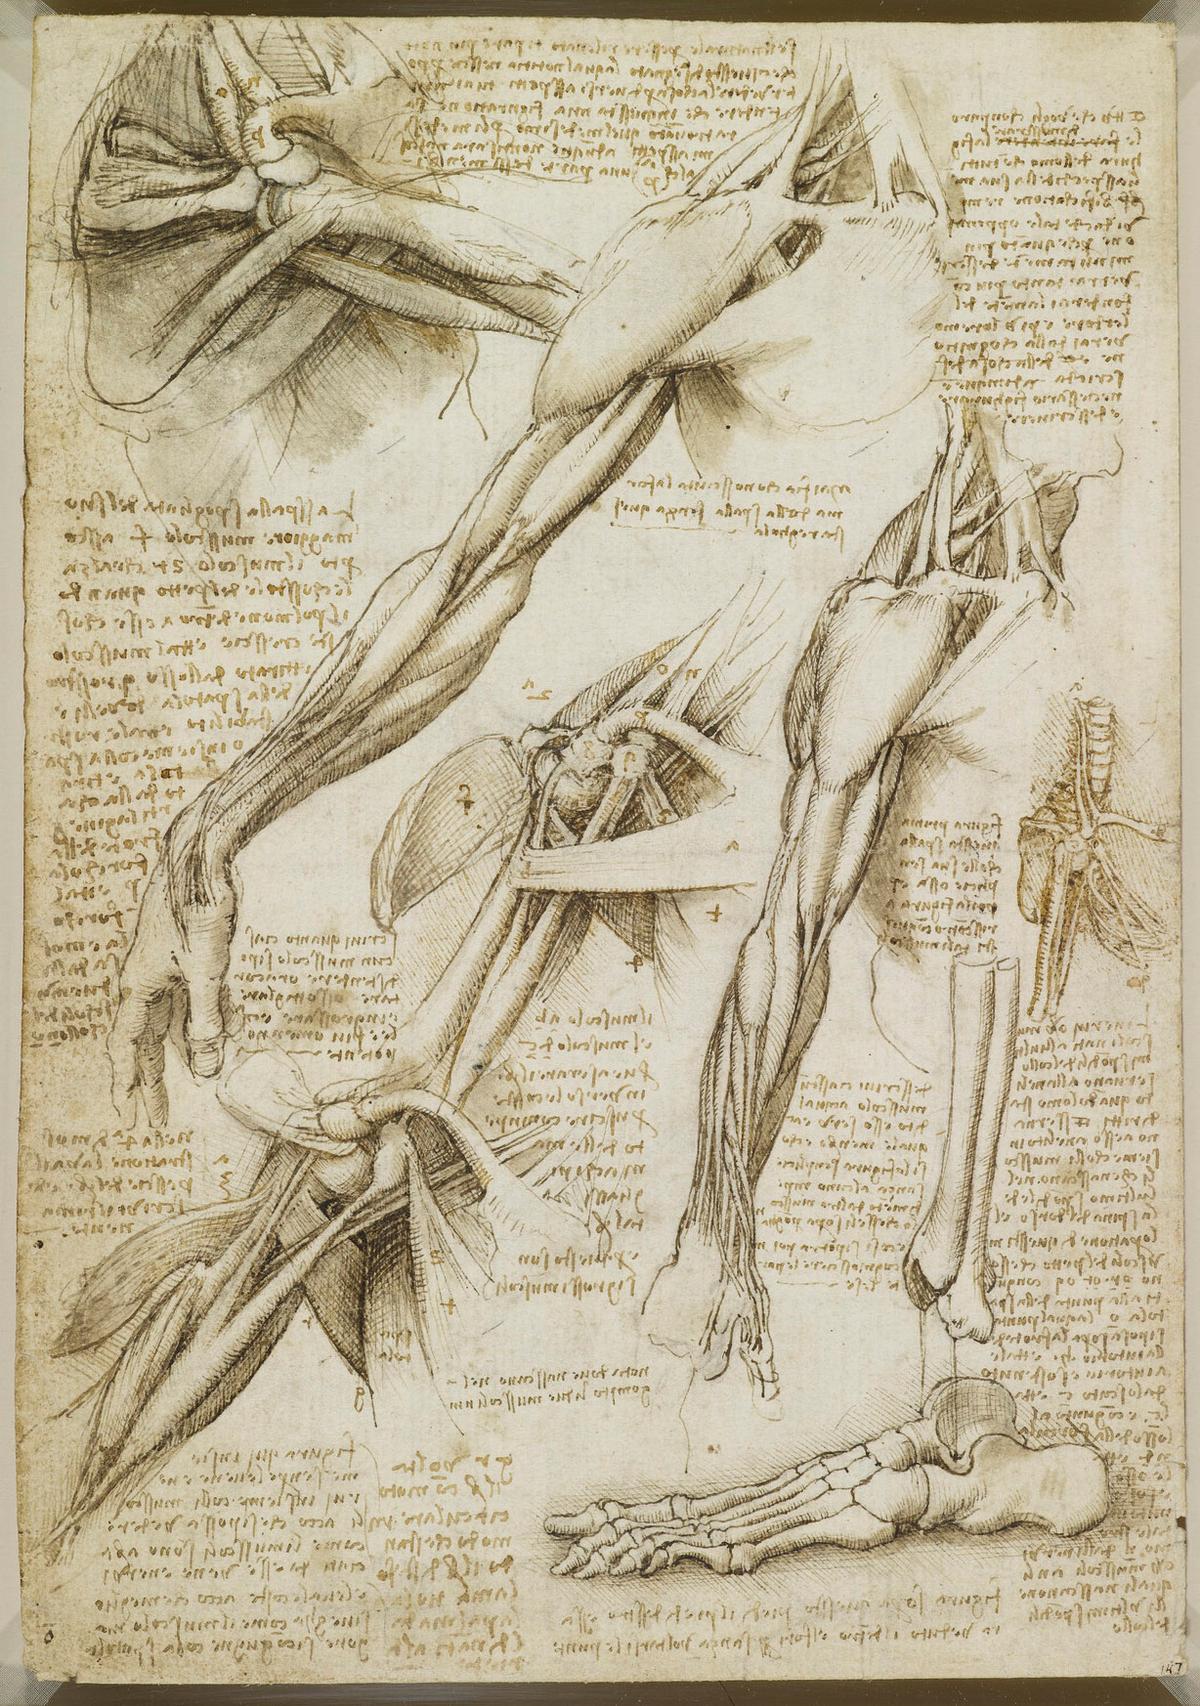 “Fol. 14v The Muscles of the Shoulder and Arm, and the Bones of the Foot.” in Pen and Ink with Wash, over traces of black chalk, 11 ⅜ inches by 7 15/16 inches, Royal Library. (Public Domain)